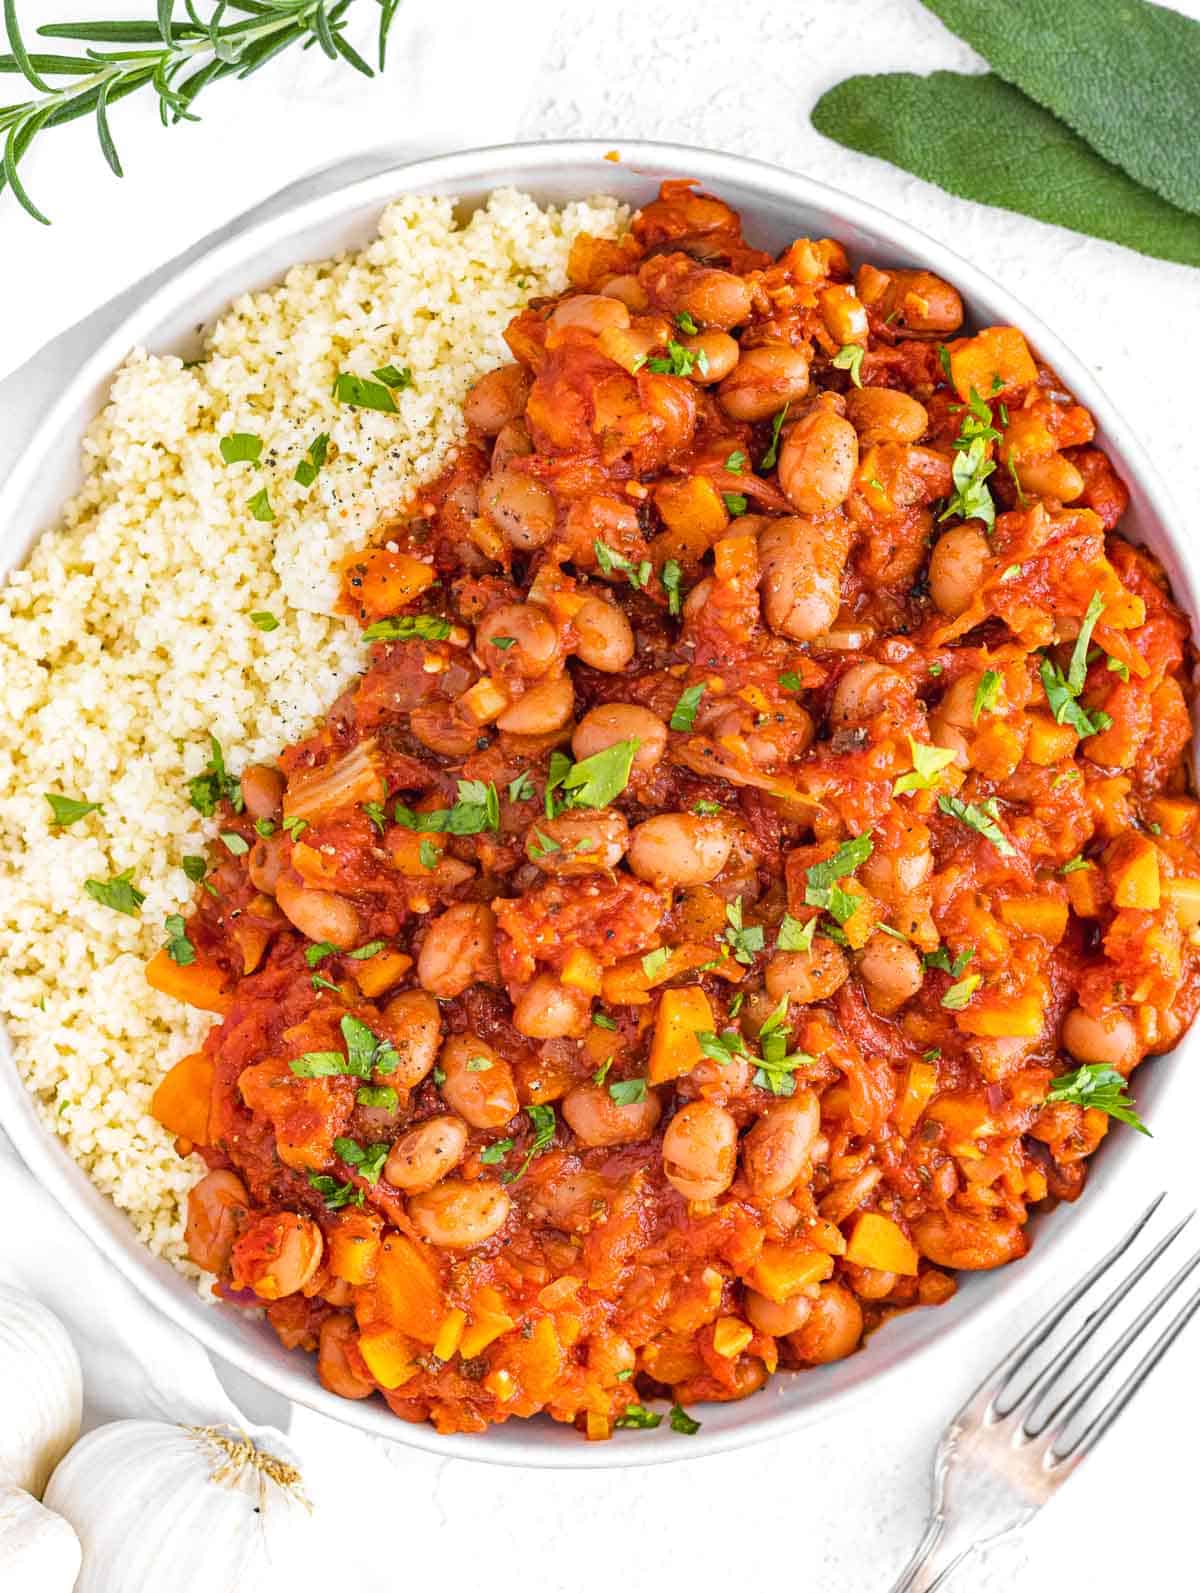 Bean stew served with couscous